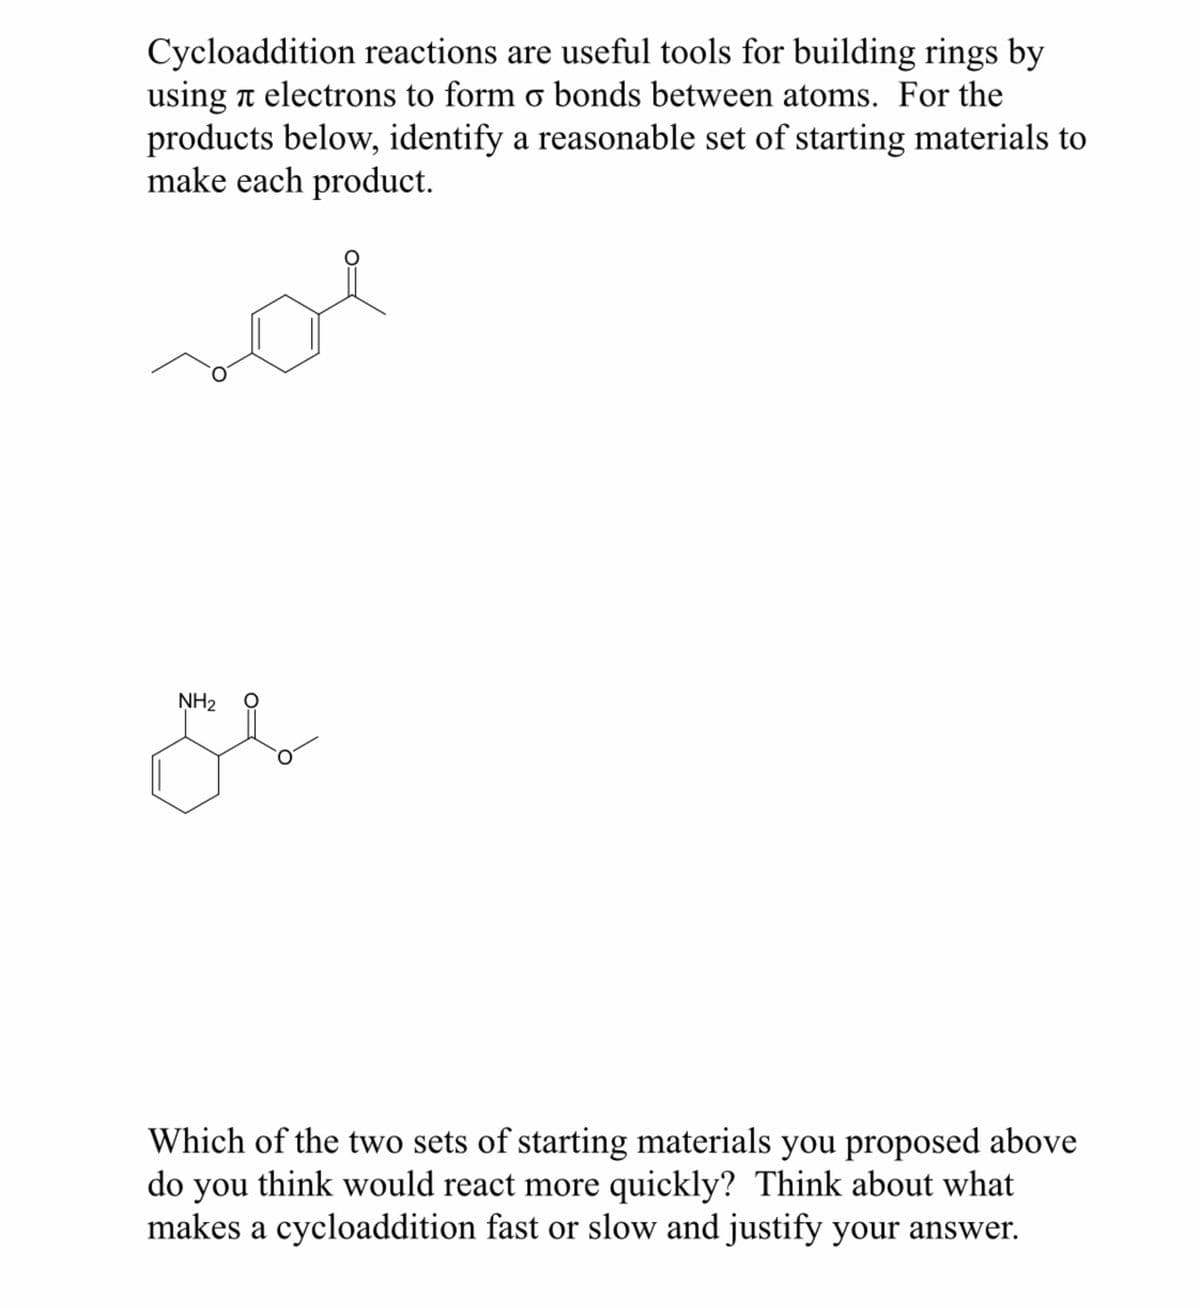 Cycloaddition reactions are useful tools for building rings by
using electrons to form o bonds between atoms. For the
products below, identify a reasonable set of starting materials to
make each product.
NH₂
O
g
O
Which of the two sets of starting materials you proposed above
do you think would react more quickly? Think about what
makes a cycloaddition fast or slow and justify your answer.